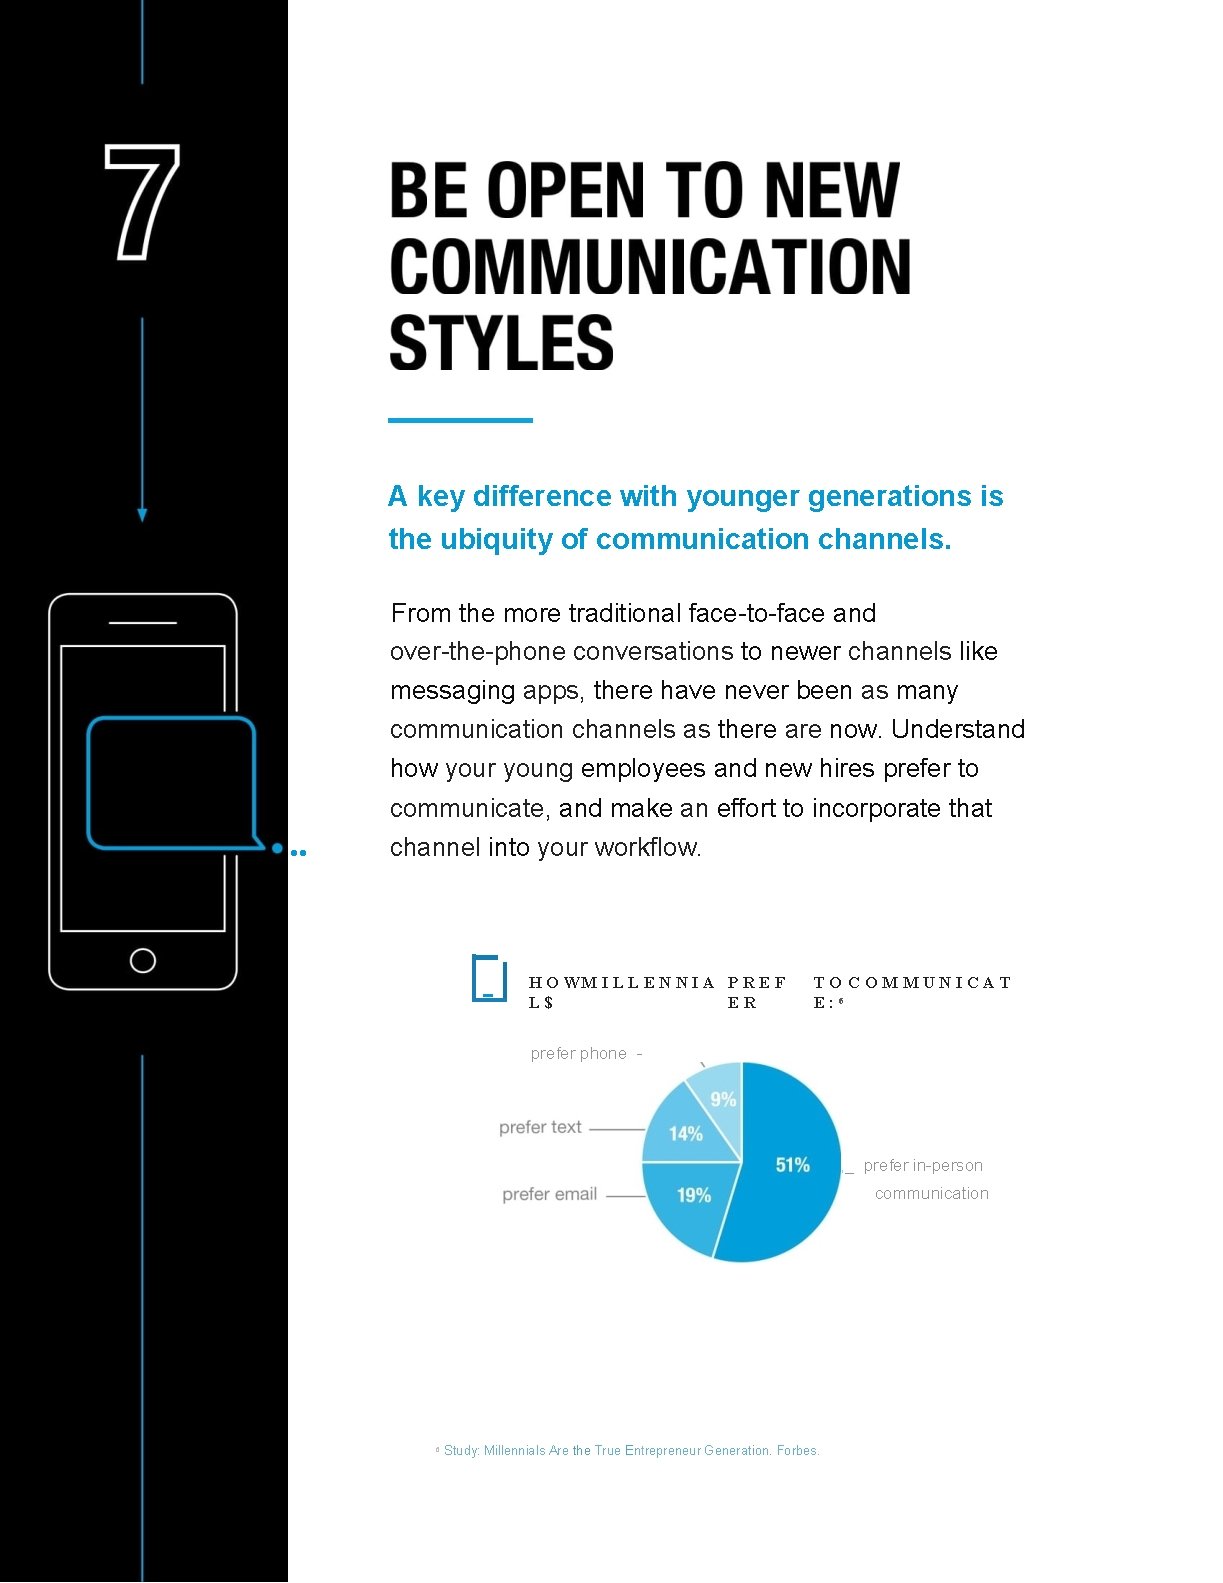 A key difference with younger generations is the ubiquity of communication channels. From the